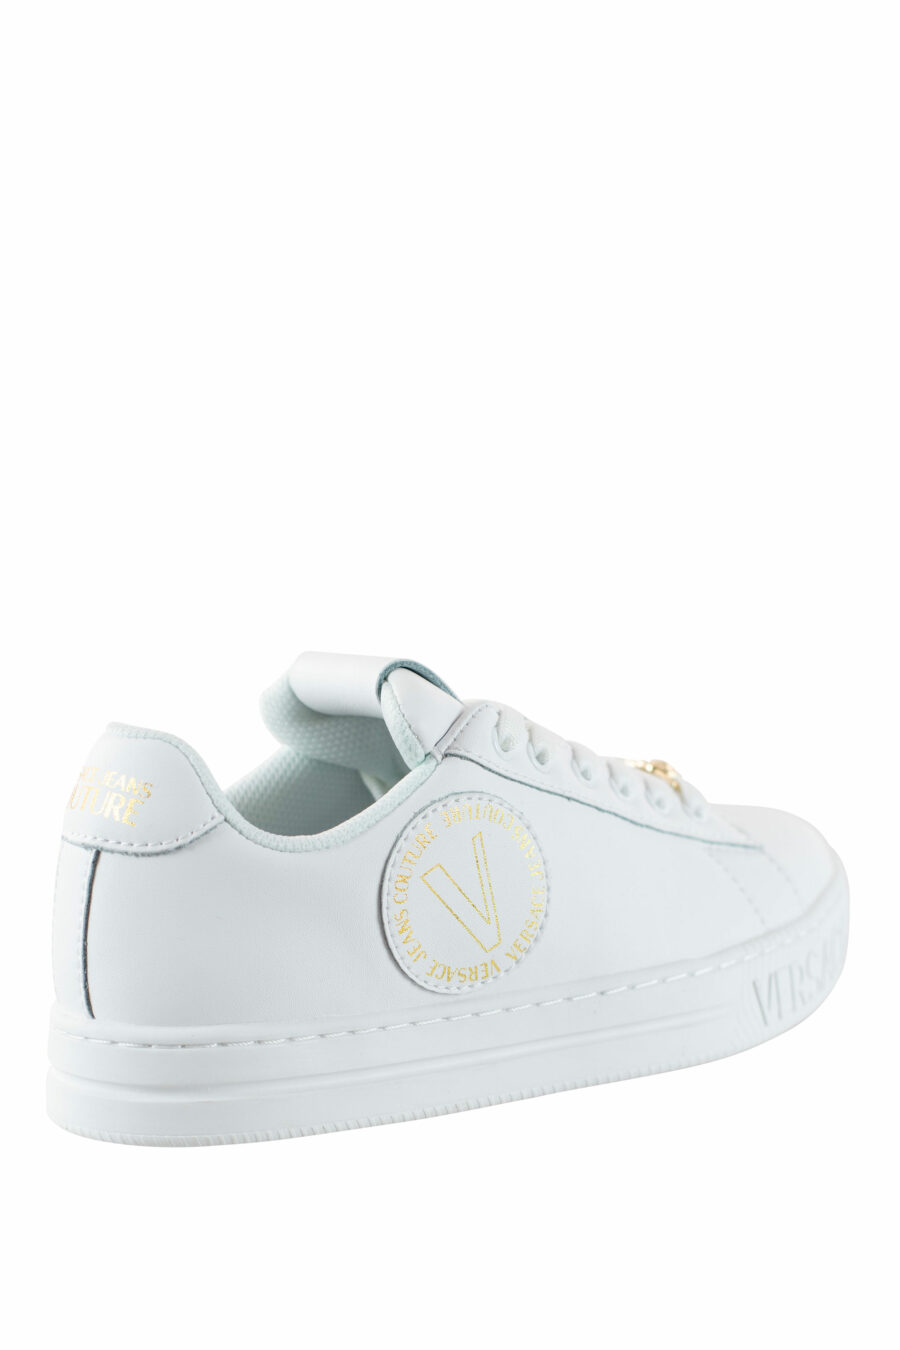 White and gold trainers with circular logo - IMG 4553